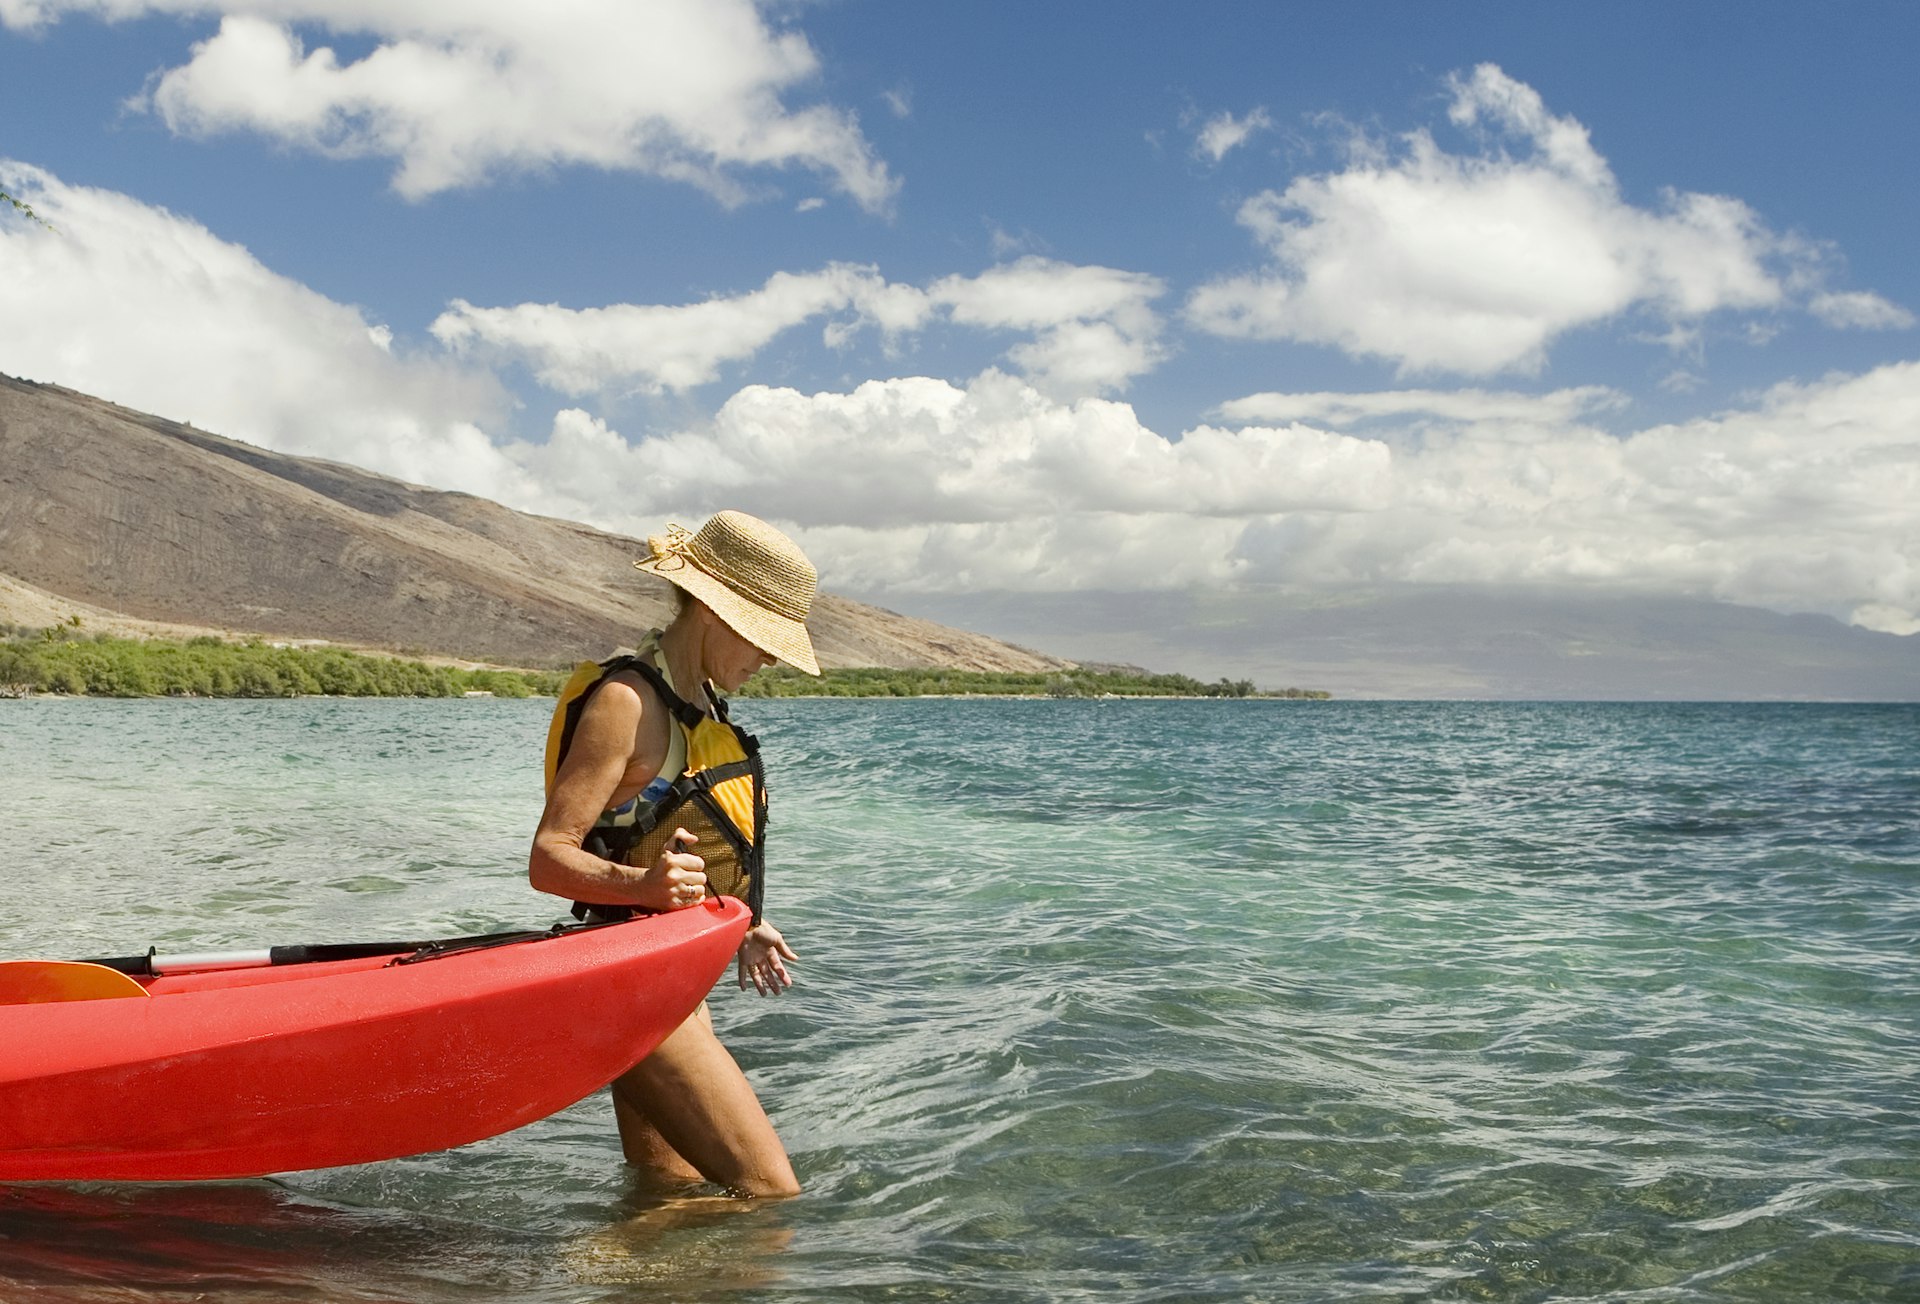 Guiding a kayak into the ocean just off the Maui coast